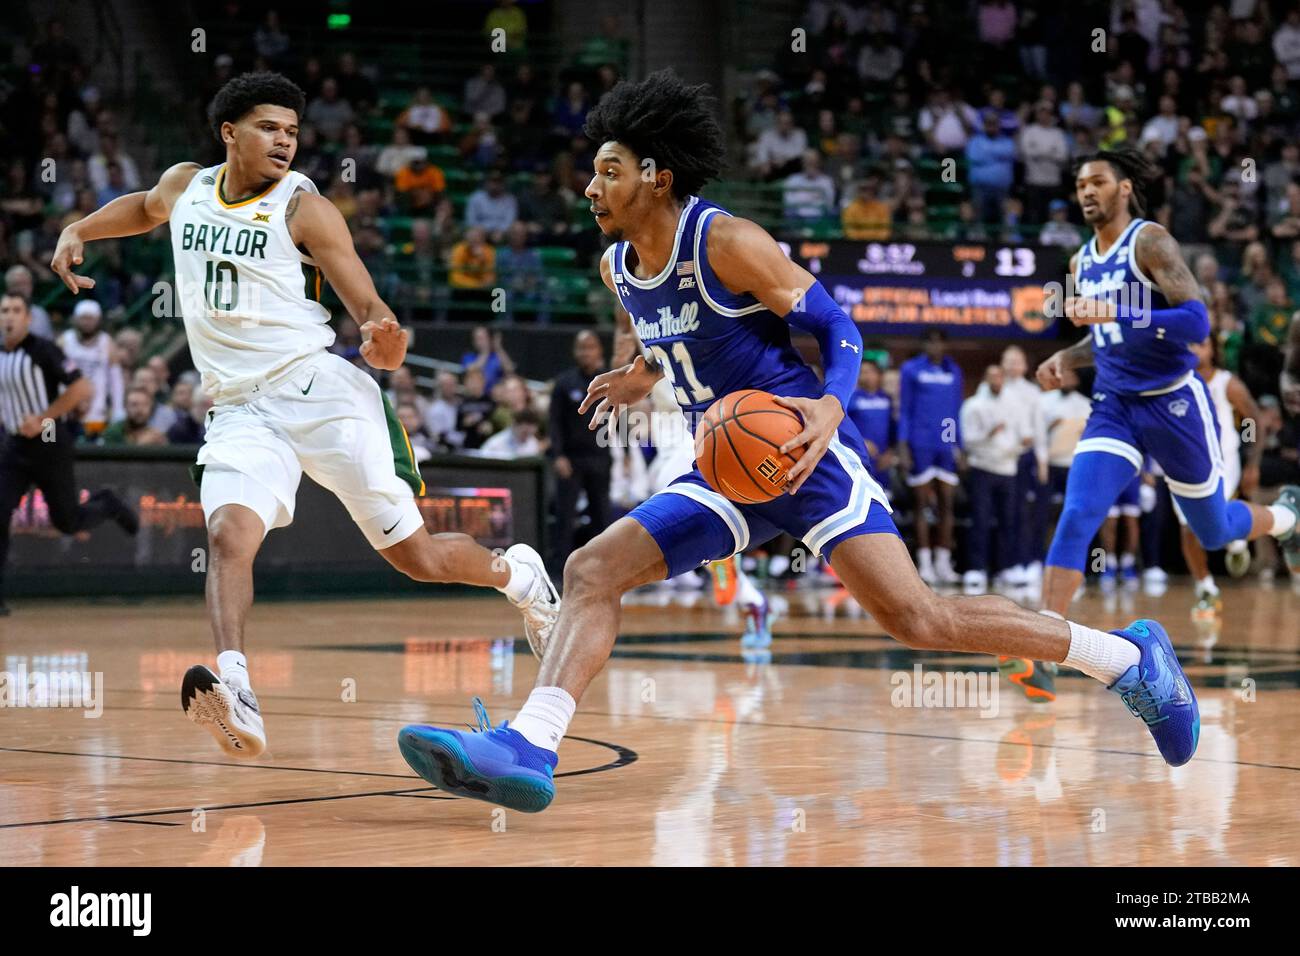 seton-hall-guard-isaiah-coleman-21-drives-to-the-basket-as-baylor-guard-rayj-dennis-10-defends-in-the-first-half-of-an-ncaa-college-basketball-game-in-waco-texas-tuesday-dec-5-2023-ap-phototony-gutierrez-2TBB2MA.jpg